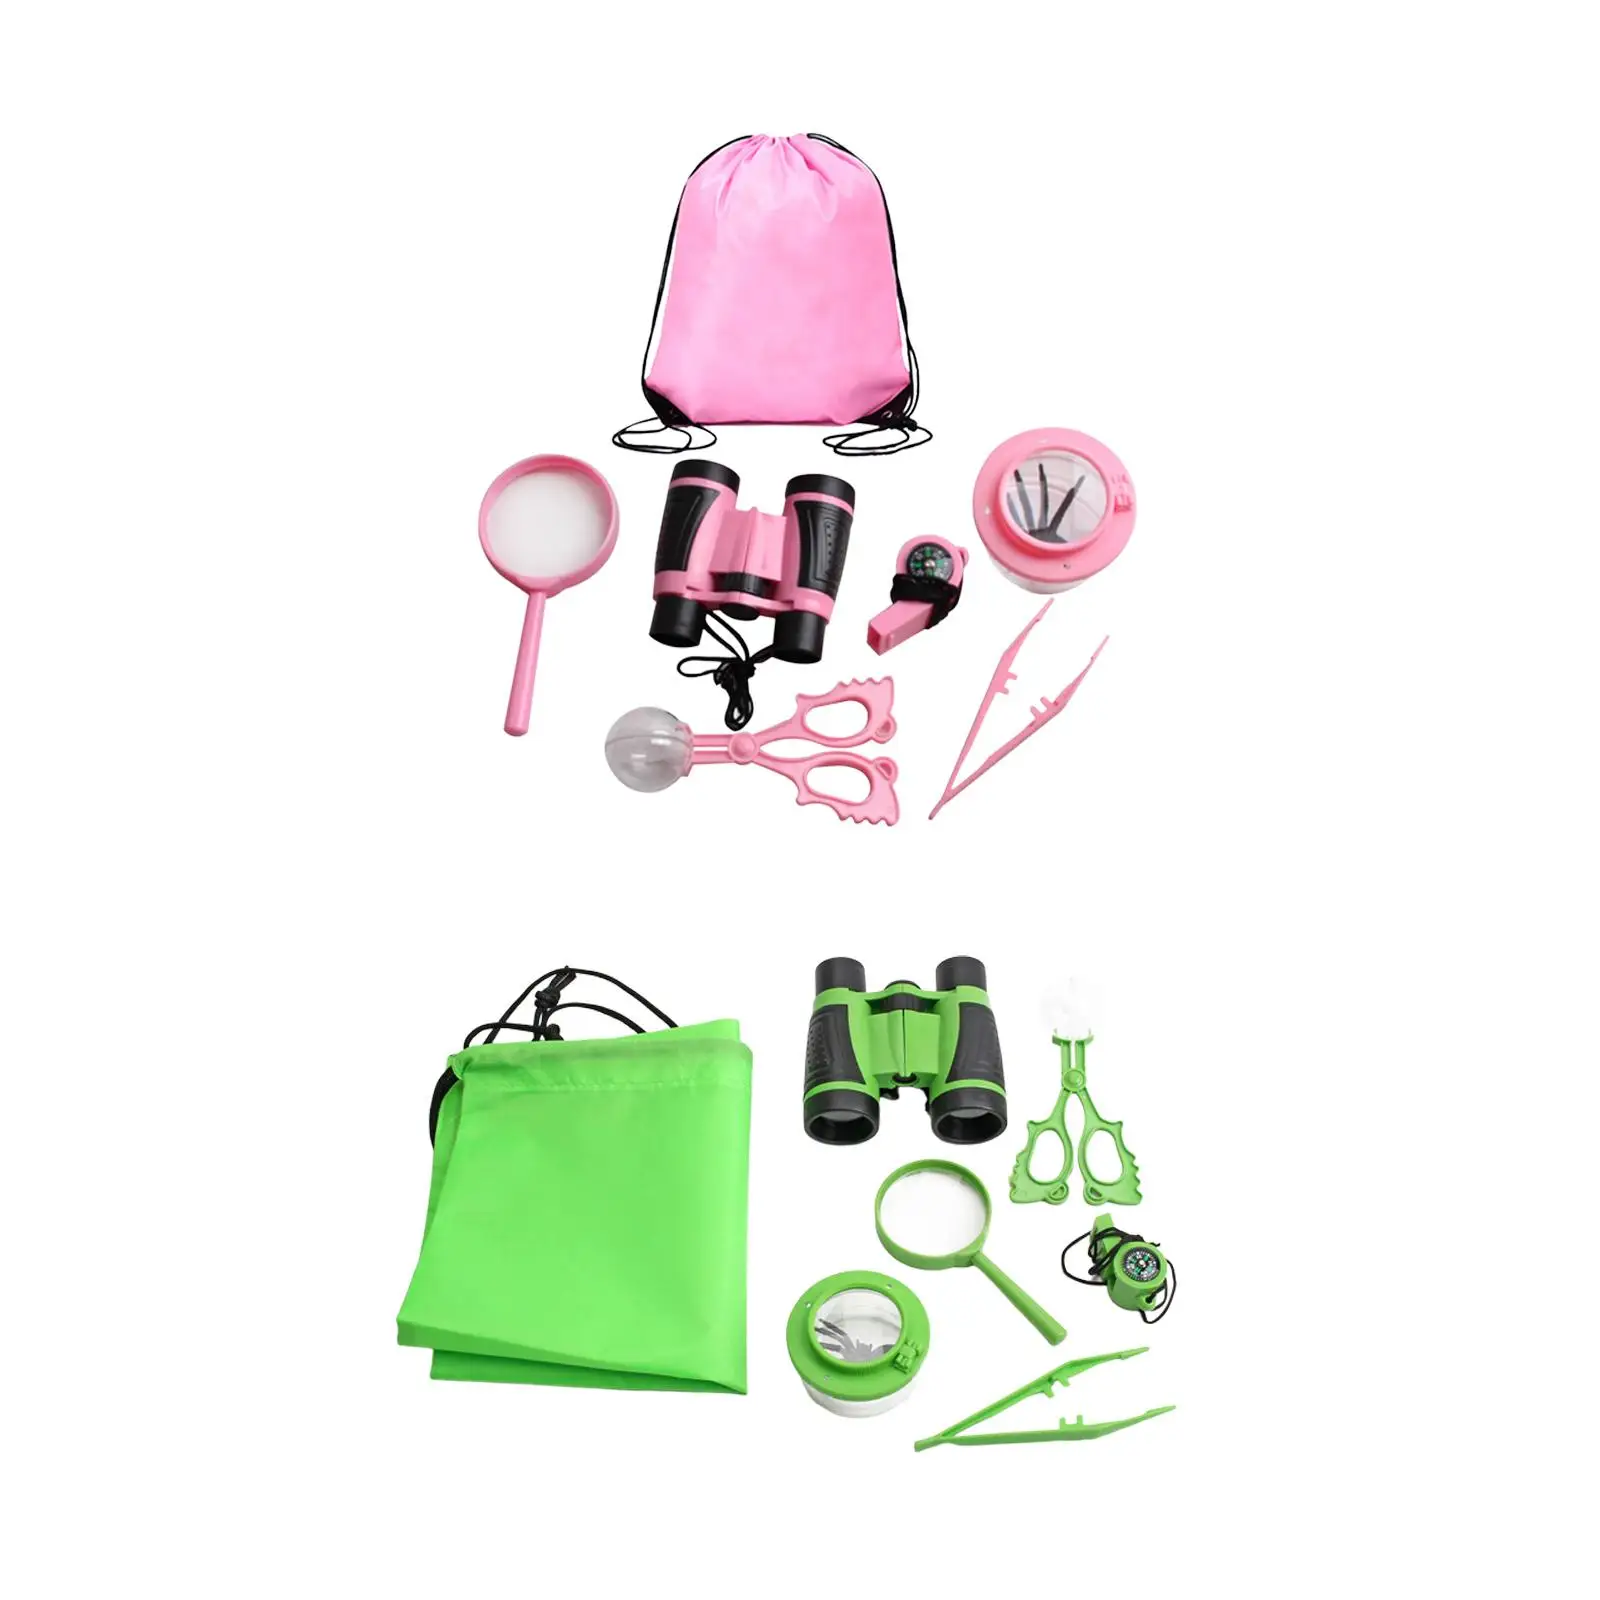 7Pcs Nature Exploration Kits Whistle Backpack for Kids Camping Gear Backyard Outdoor Games Plants Animal Learning Kids Children